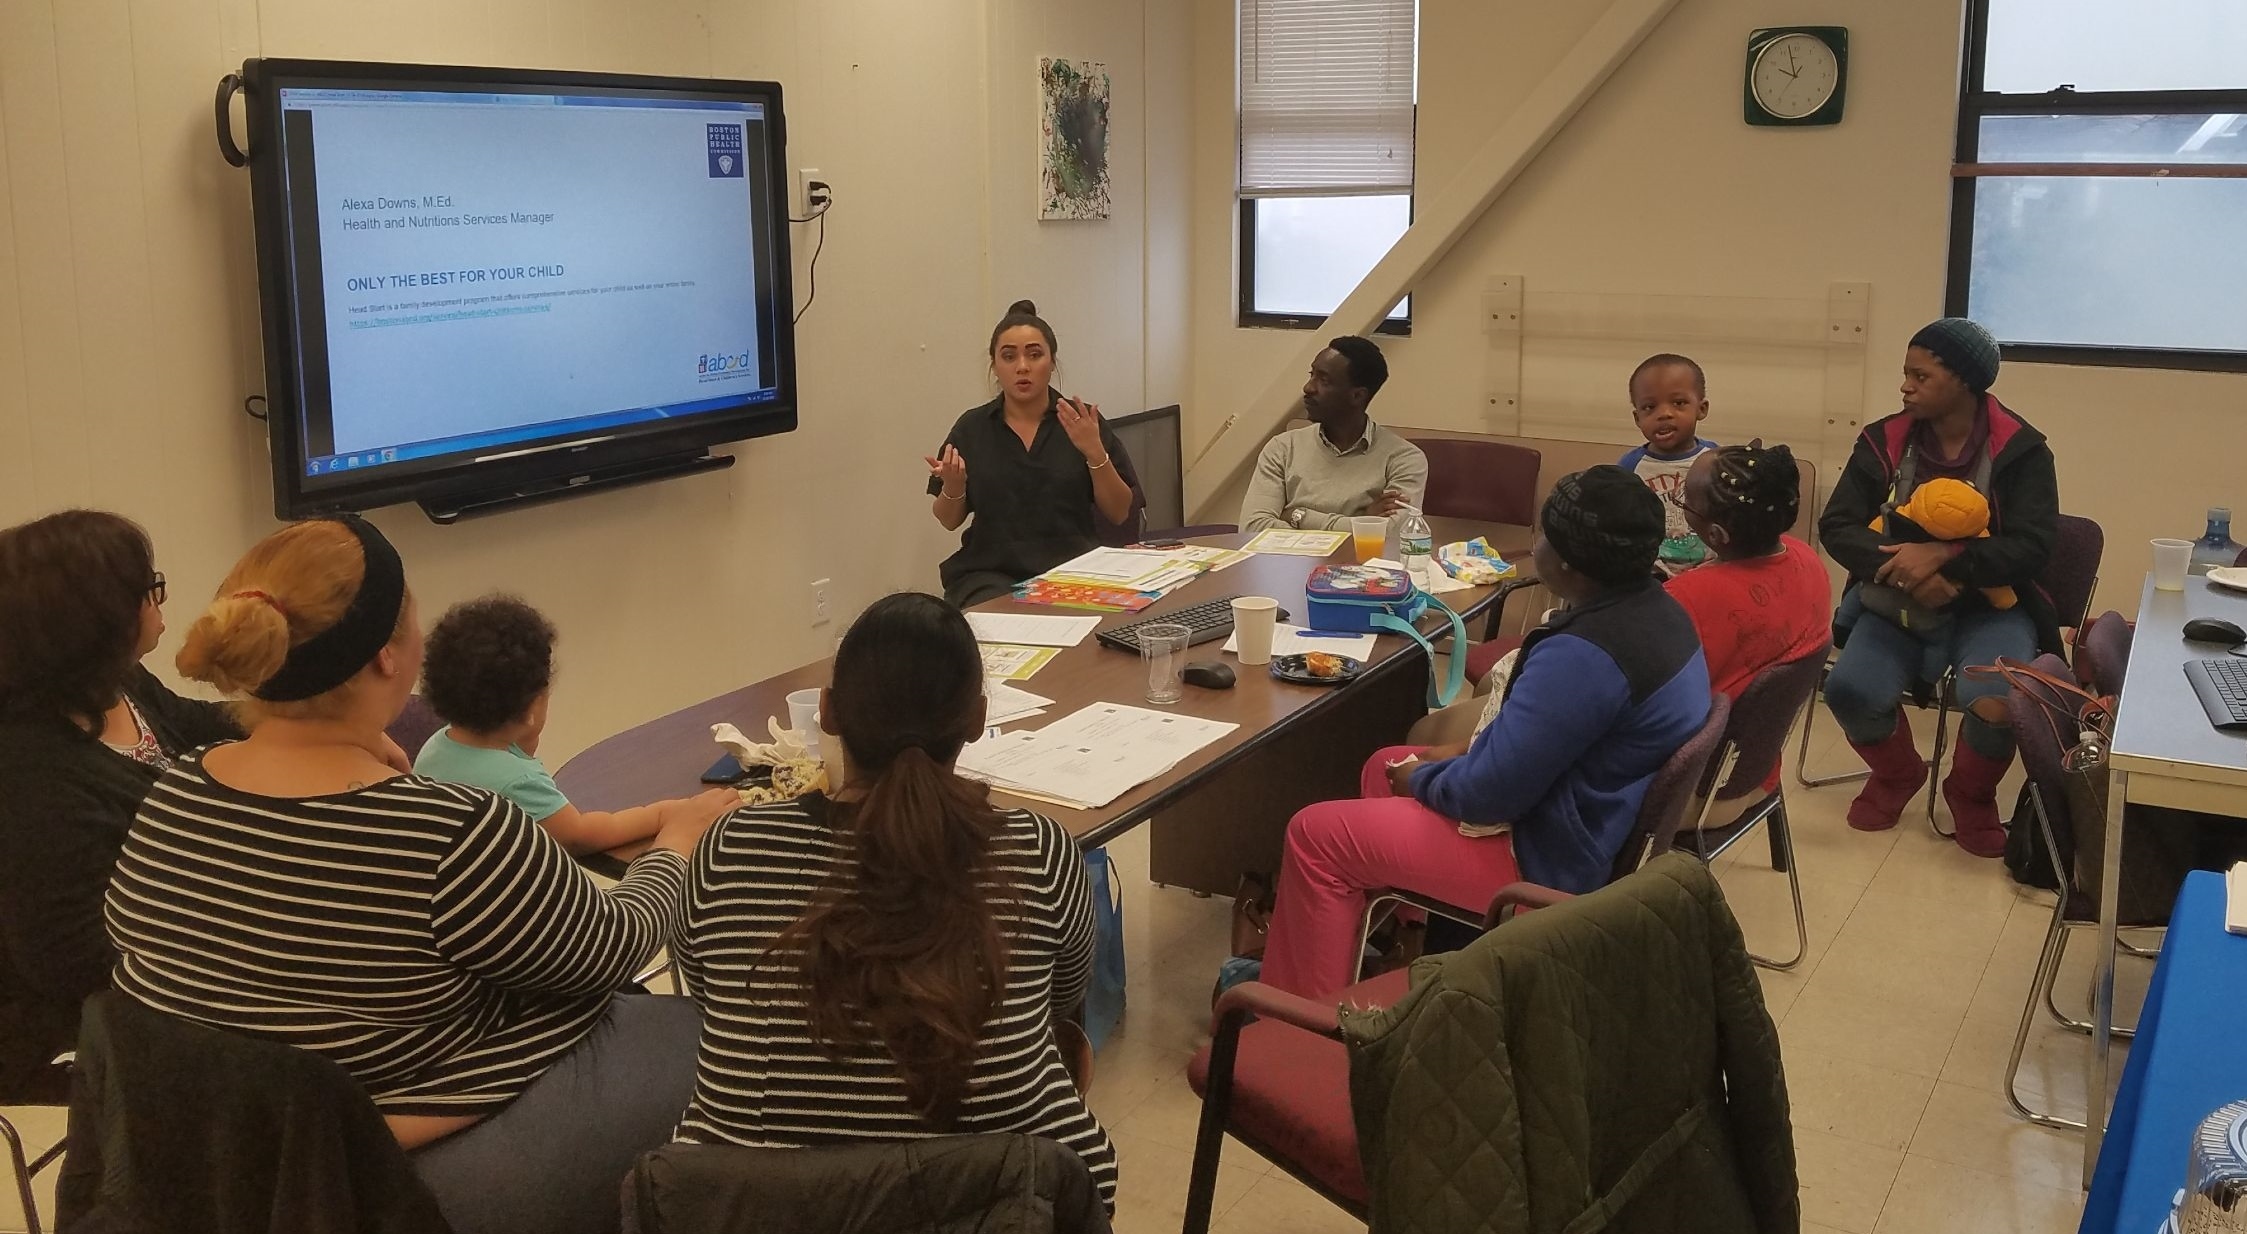  October 24, 2018, the first PAN session ABCD Geneva Avenue. Participants heard from Alexa Down, M. ED and Moussa Cisse (ABCD Health and Nutrition Services Managers) about the importance of having healthier options and the role as service managers as